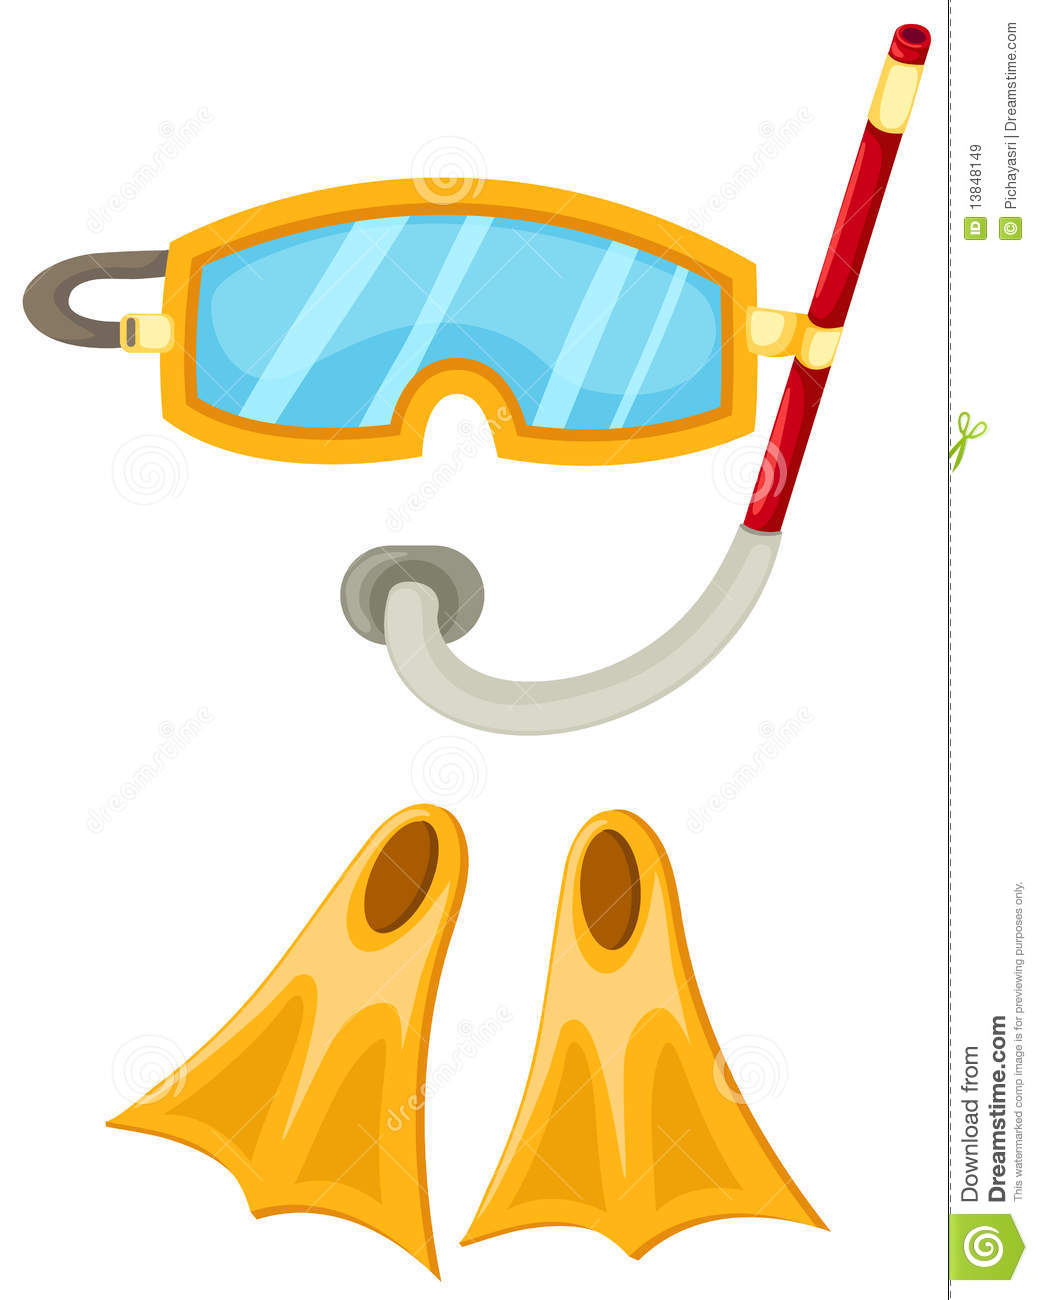 Snorkeling Equipment And Flippers Royalty Free Stock Images   Image    